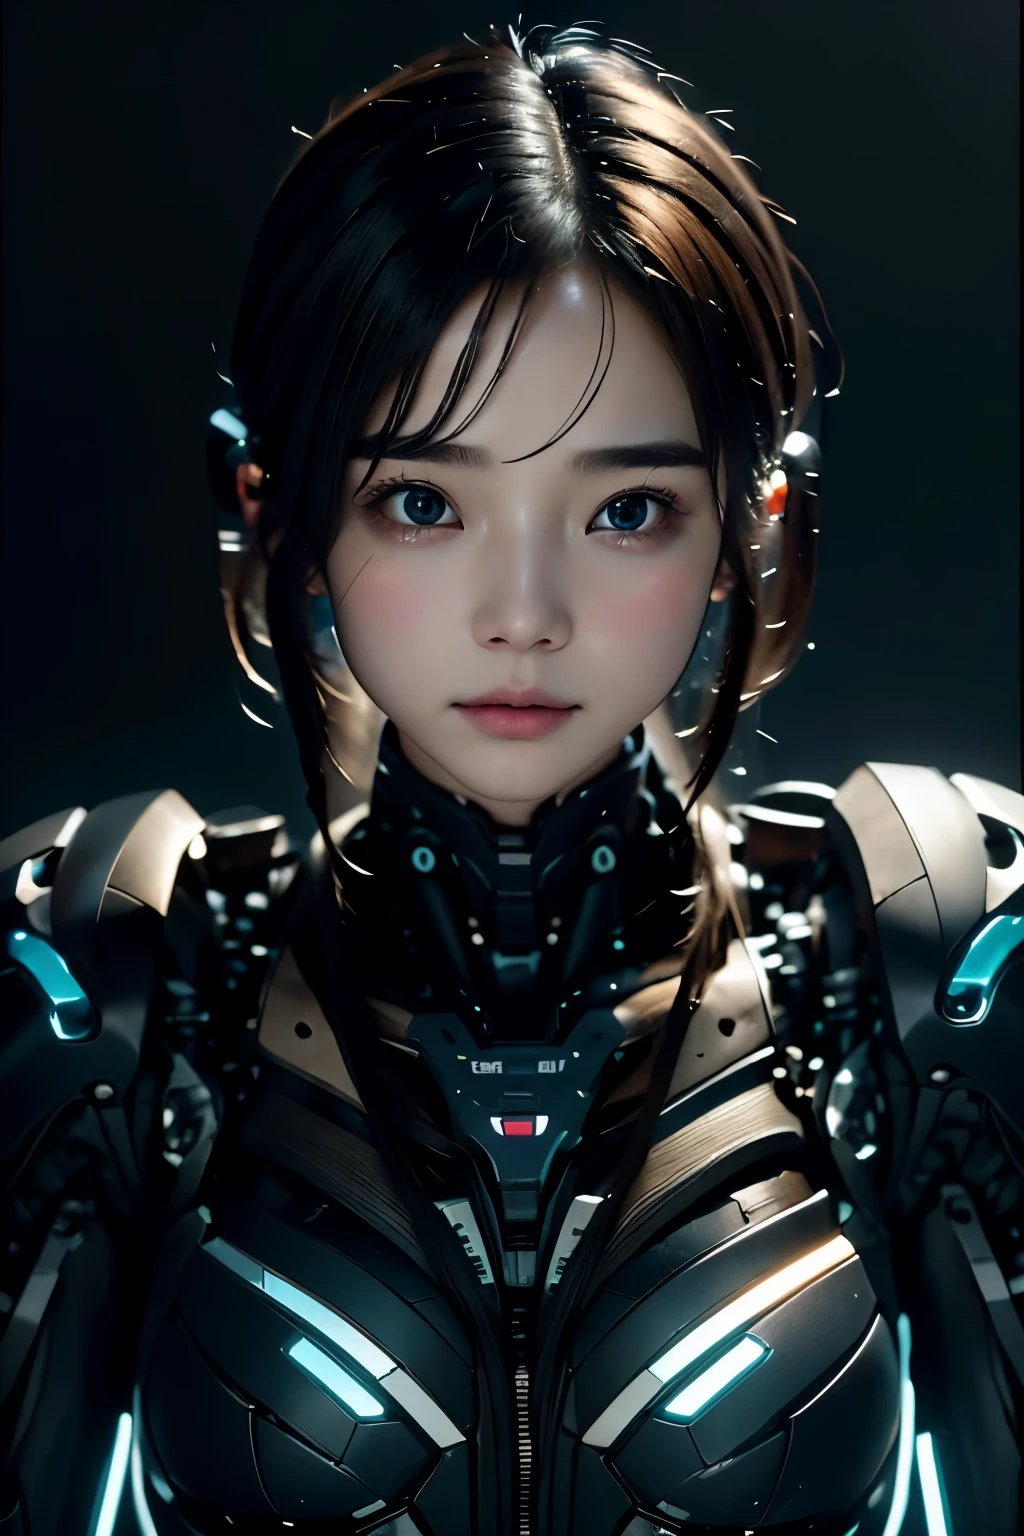 Intelligent Bionic Robot, girl、Cyborg Robot Parts、cable electric wireicrochipright studio、(hyperphotorealism、high-detail、intricate detaileinelighting, rendering by octane、portrait), neon blue Lights, Unreal Engine 5 Renderechanical Public Enemy Style、8K、top-quality、​masterpiece、Low ISO、White Balance、high key lighting、Creates a soft and graceful feel with a shallow depth of field,超A high resolution,muscular, cyberpunked,black hair, mechanisms body, mechanisms legs, blue orb in body